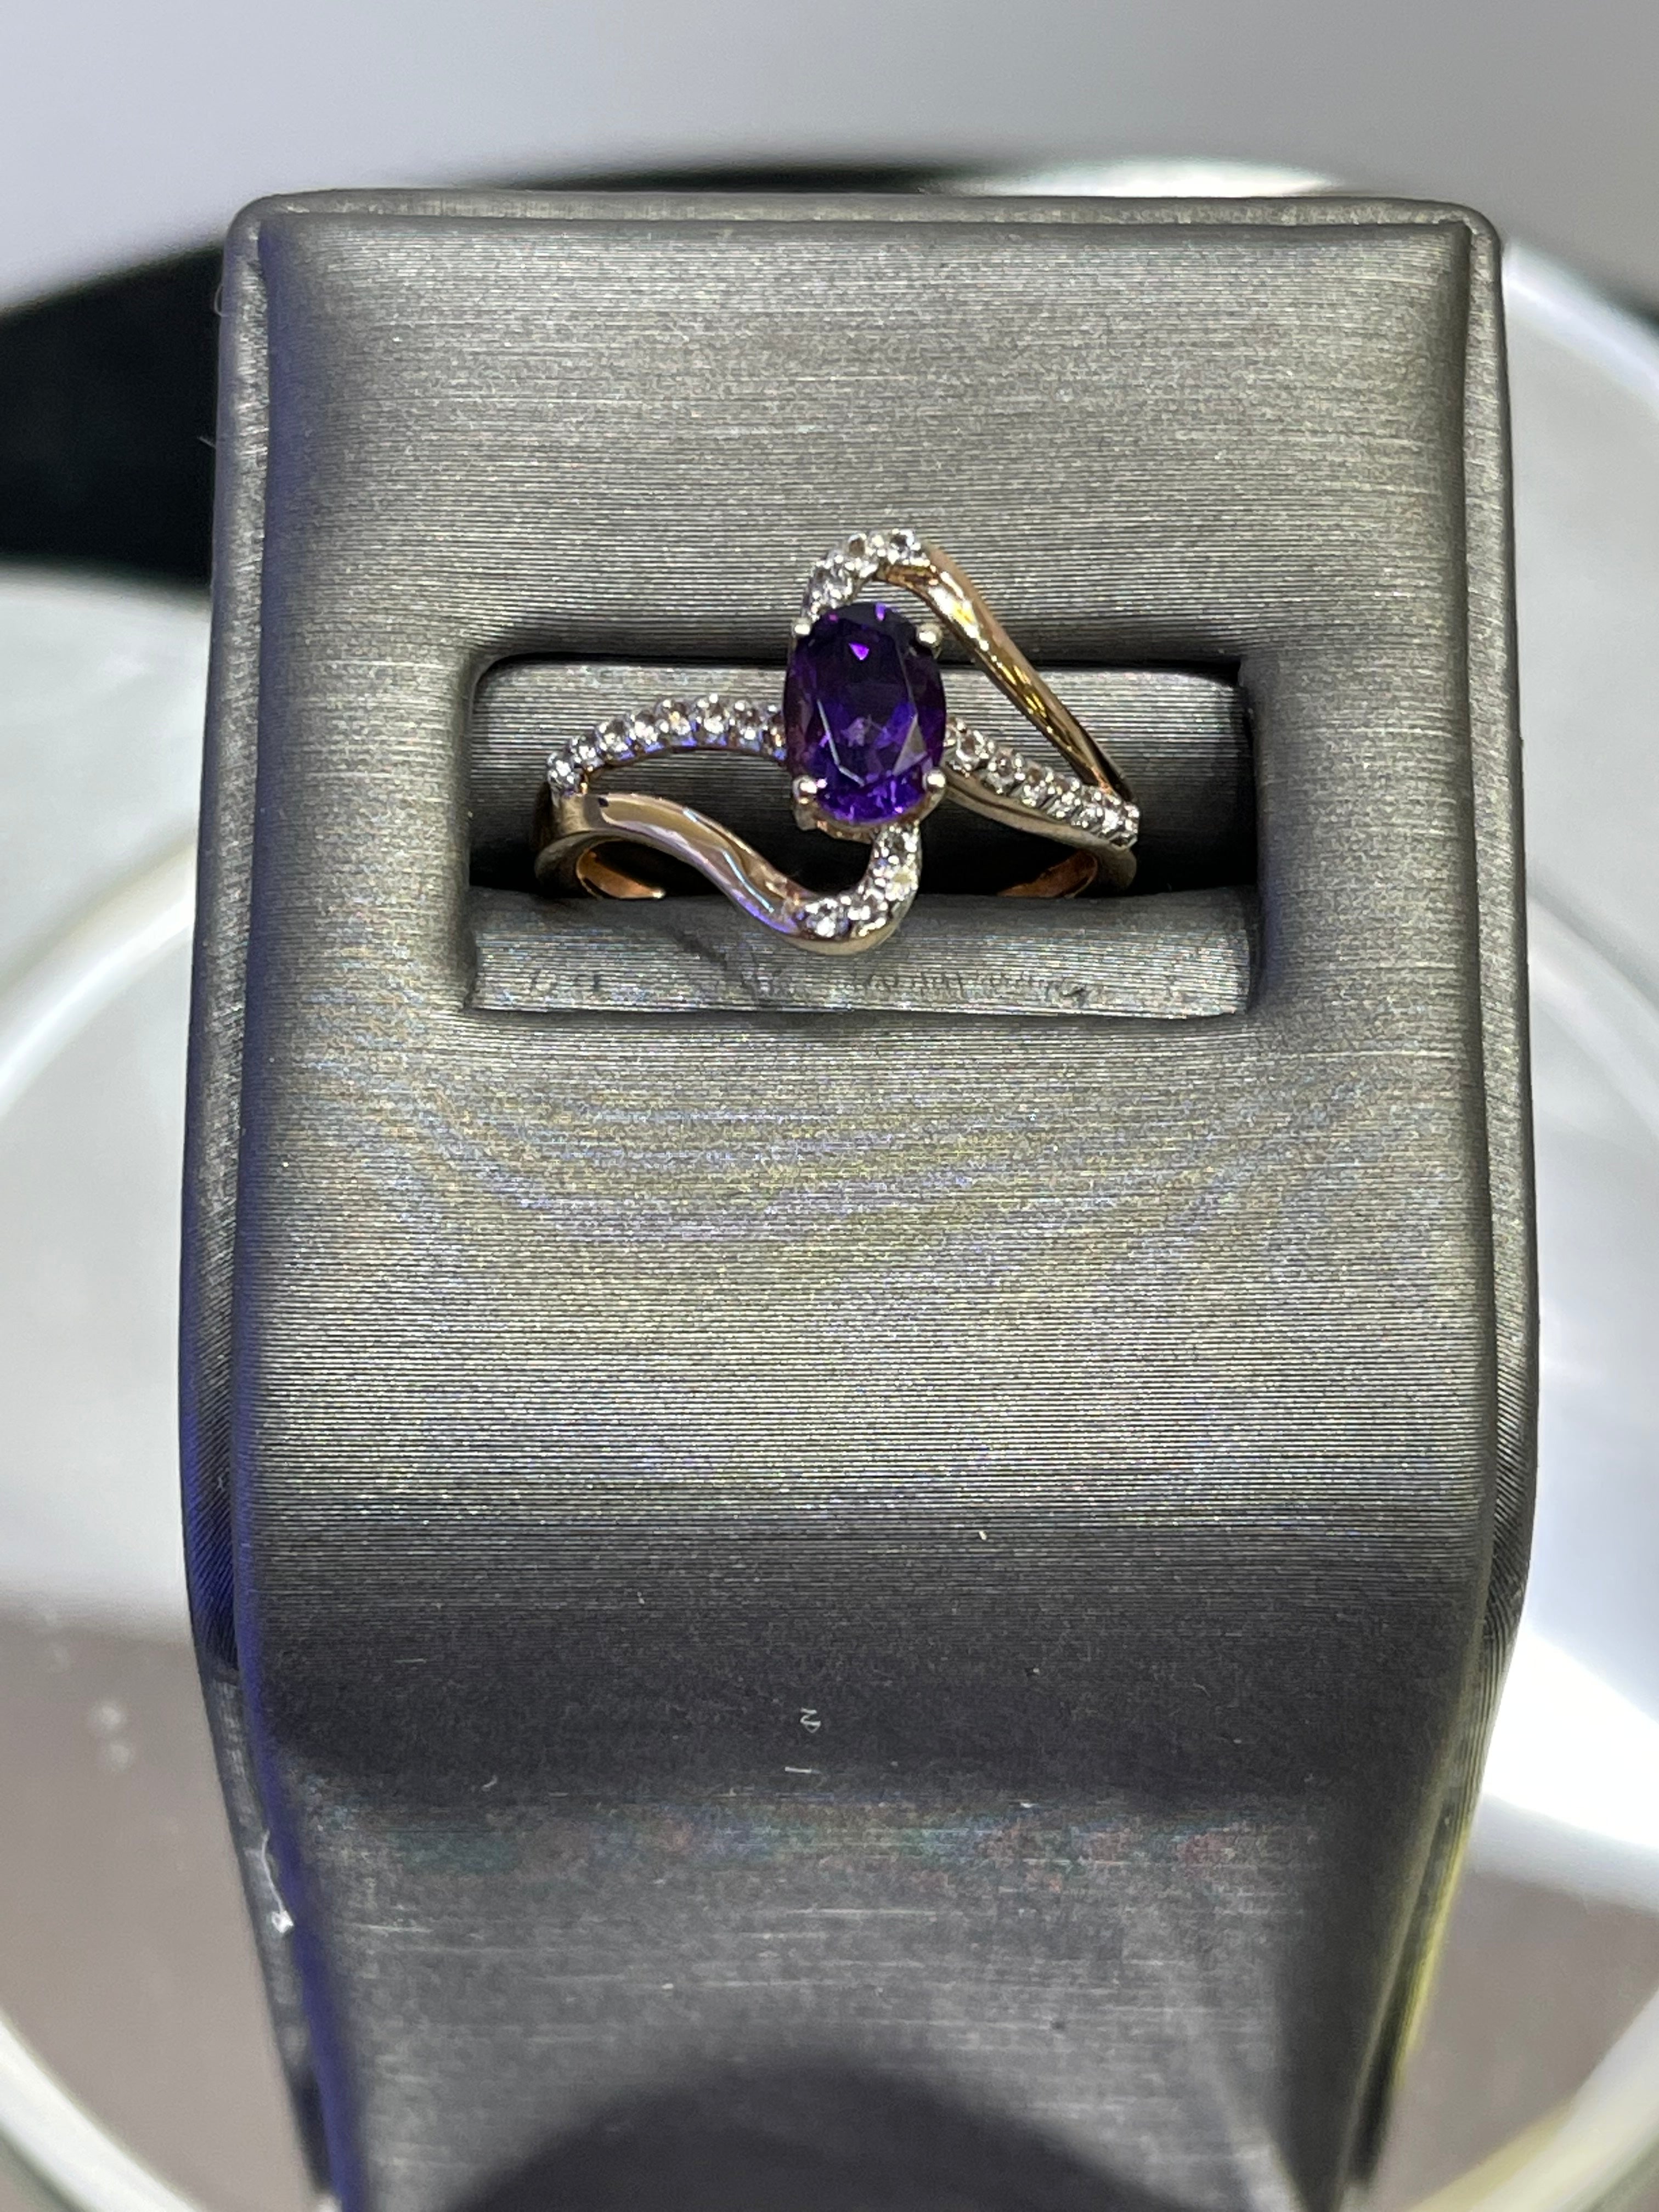 Ribbon & Reed Fantasies Lavender Amethyst Bezel Set Solitaire Ring in 18K  yellow gold – Peter Thomas Roth Designs